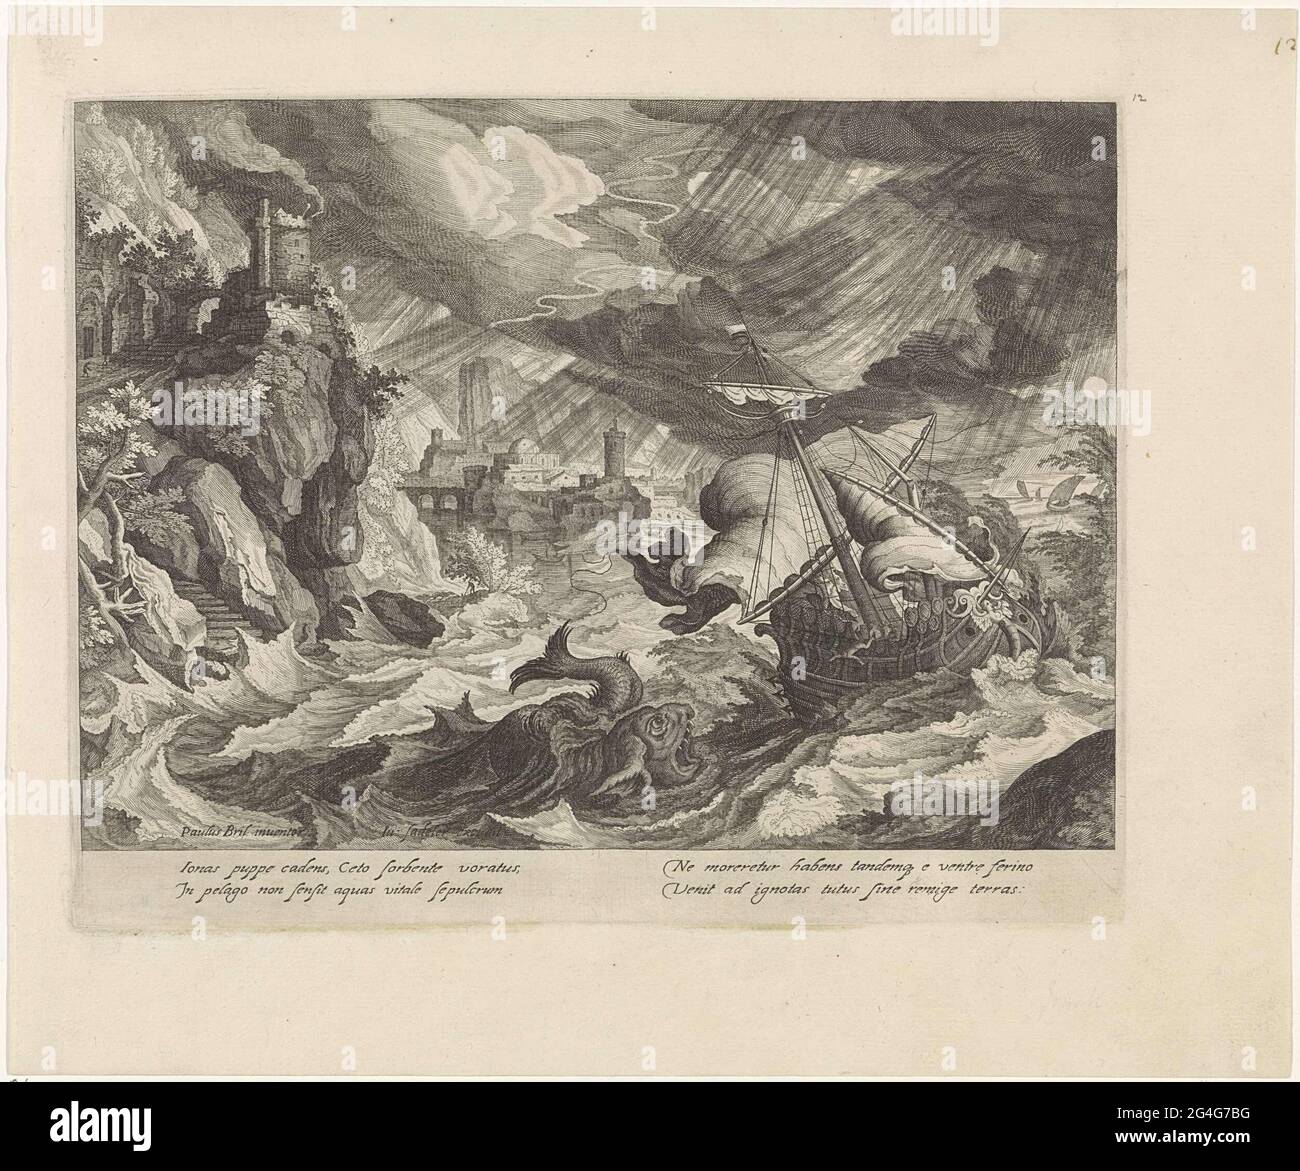 . A coastal landscape with a heavy storm. In the foreground a boat with Jonah thrown overboard by the fishermen. A sea sample swims next to the boat and is at the point to be sloping Jonah. The print has a Latin caption with Jonah's story. Stock Photo